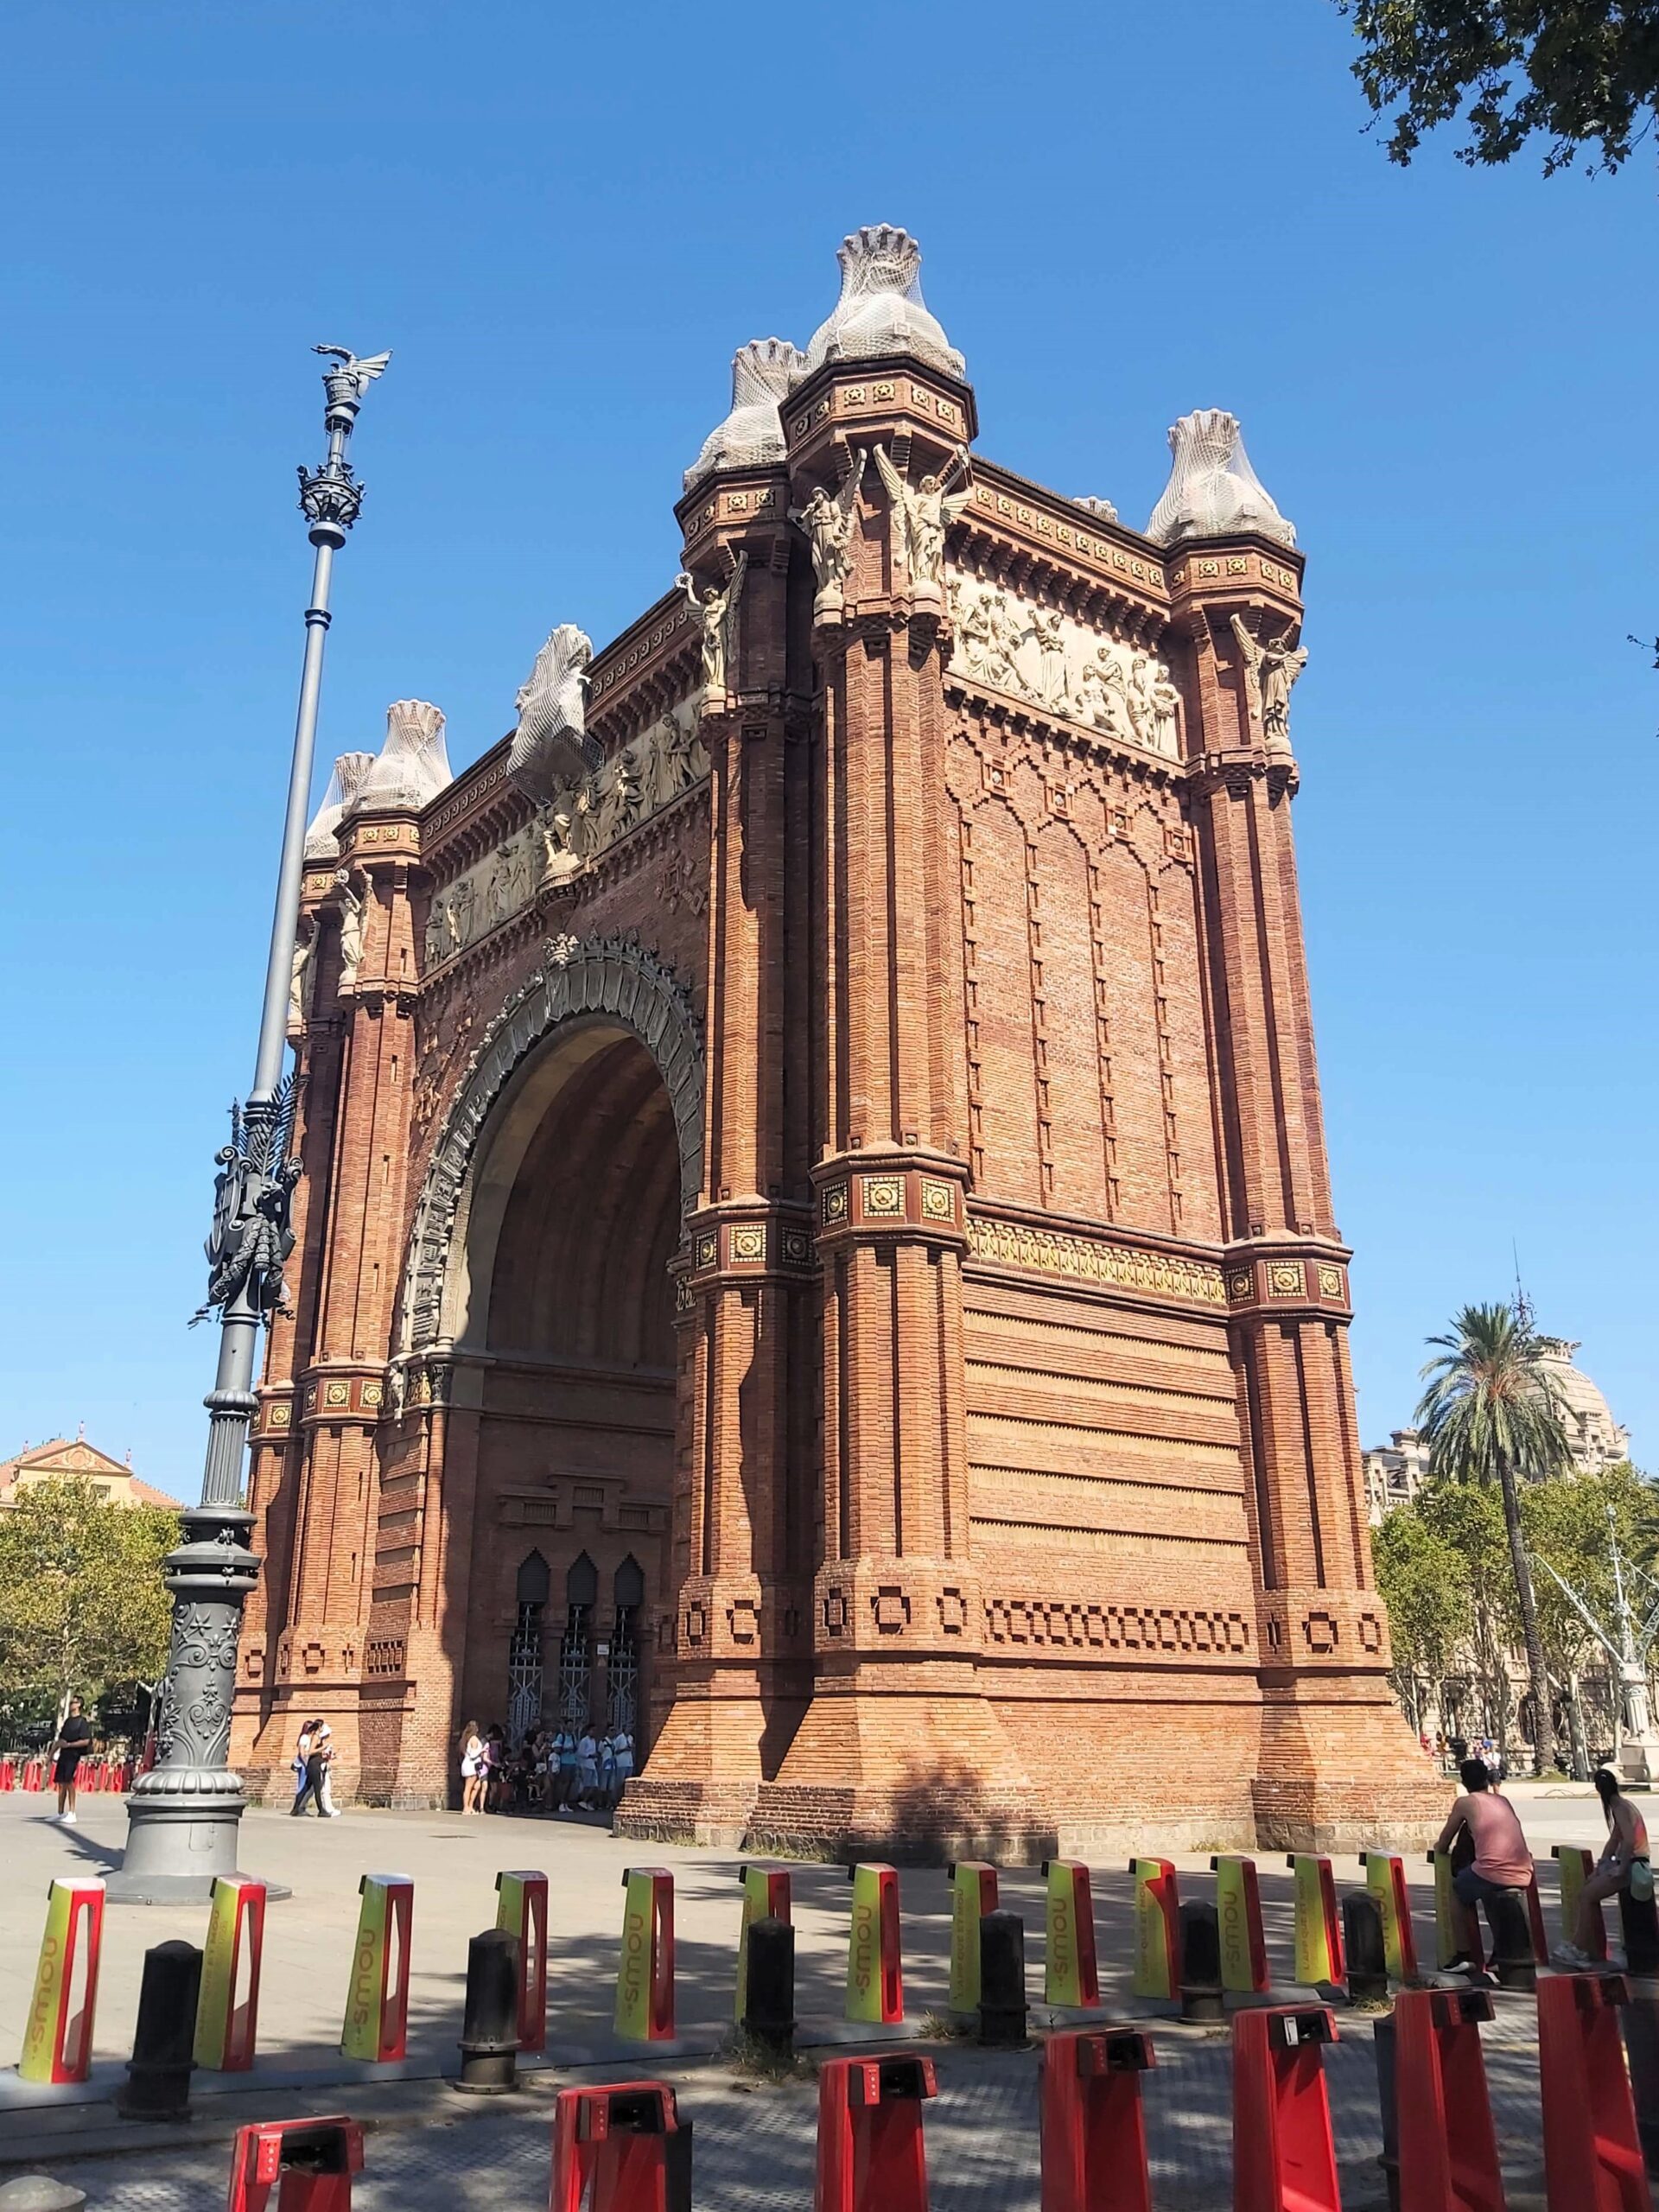 Large arch in Barcelona, Spain